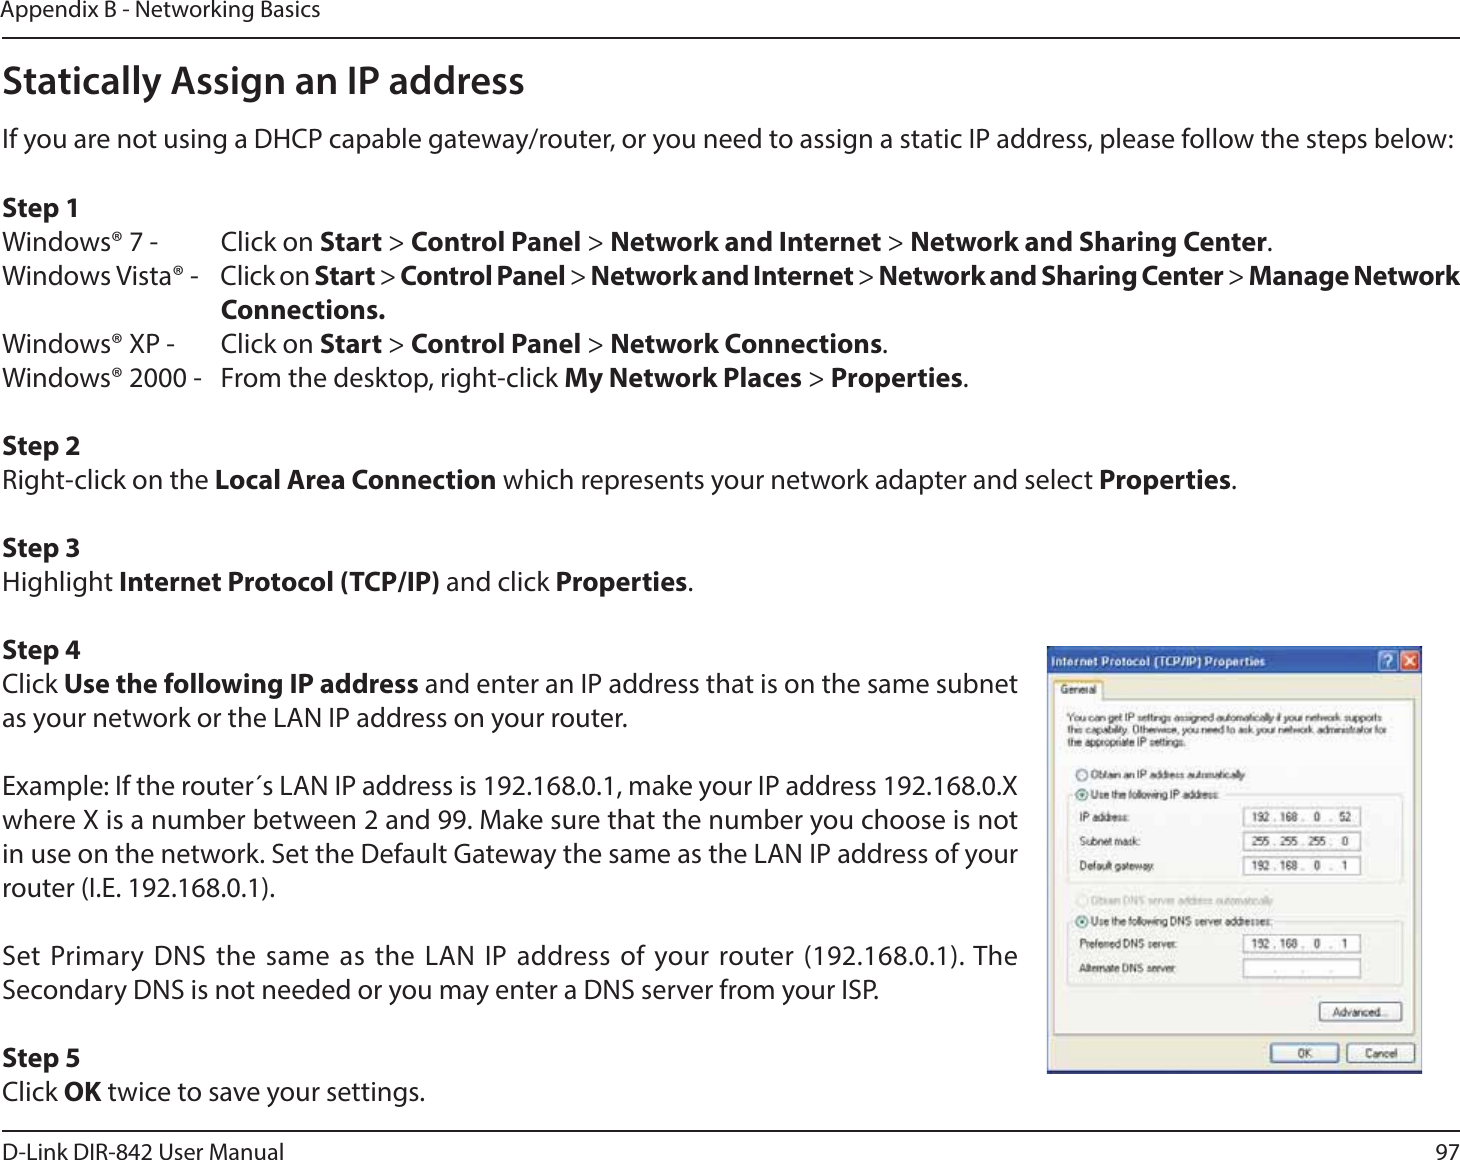 97D-Link DIR-842 User ManualAppendix B - Networking BasicsStatically Assign an IP addressIf you are not using a DHCP capable gateway/router, or you need to assign a static IP address, please follow the steps below:Step 1Windows® 7 -  Click on Start &gt; Control Panel &gt; Network and Internet &gt; Network and Sharing Center.Windows Vista® -  Click on Start &gt; Control Panel &gt; Network and Internet &gt; Network and Sharing Center &gt; Manage Network    Connections.Windows® XP -  Click on Start &gt; Control Panel &gt; Network Connections.Windows® 2000 -  From the desktop, right-click My Network Places &gt; Properties.4UFQRight-click on the -PDBM&quot;SFB$POOFDUJPO which represents your network adapter and select Properties.Step 3Highlight *OUFSOFU1SPUPDPM5$1*1 and click Properties.Step 4Click Use the following IP address and enter an IP address that is on the same subnet as your network or the LAN IP address on your router. Example: If the router´s LAN IP address is 192.168.0.1, make your IP address 192.168.0.X where X is a number between 2 and 99. Make sure that the number you choose is not in use on the network. Set the Default Gateway the same as the LAN IP address of your SPVUFS*&amp;4FU1SJNBSZ %/4UIFTBNFBTUIF -&quot;/*1BEESFTTPG ZPVSSPVUFS5IFSecondary DNS is not needed or you may enter a DNS server from your ISP.Step 5Click 0, twice to save your settings.